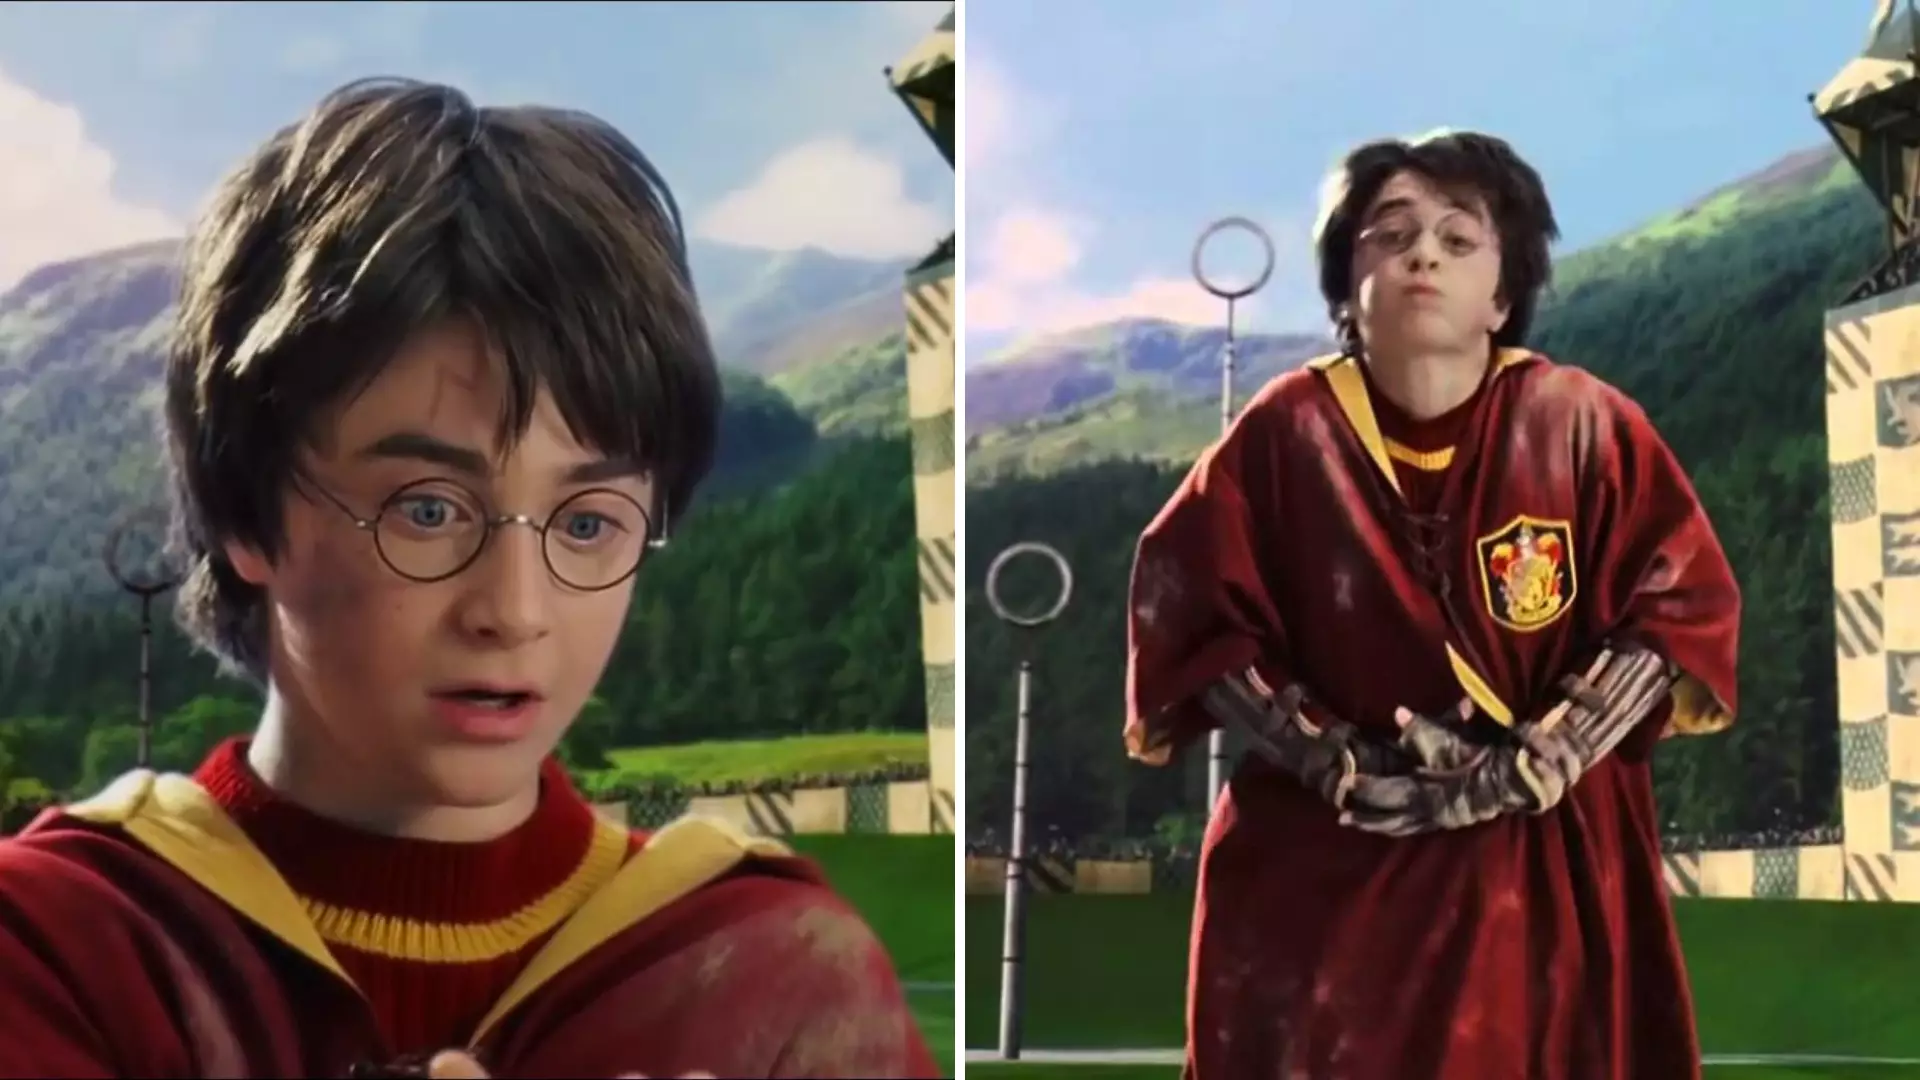 27 Years Ago Today, Harry Potter Made His Quidditch Debut For Gryffindor